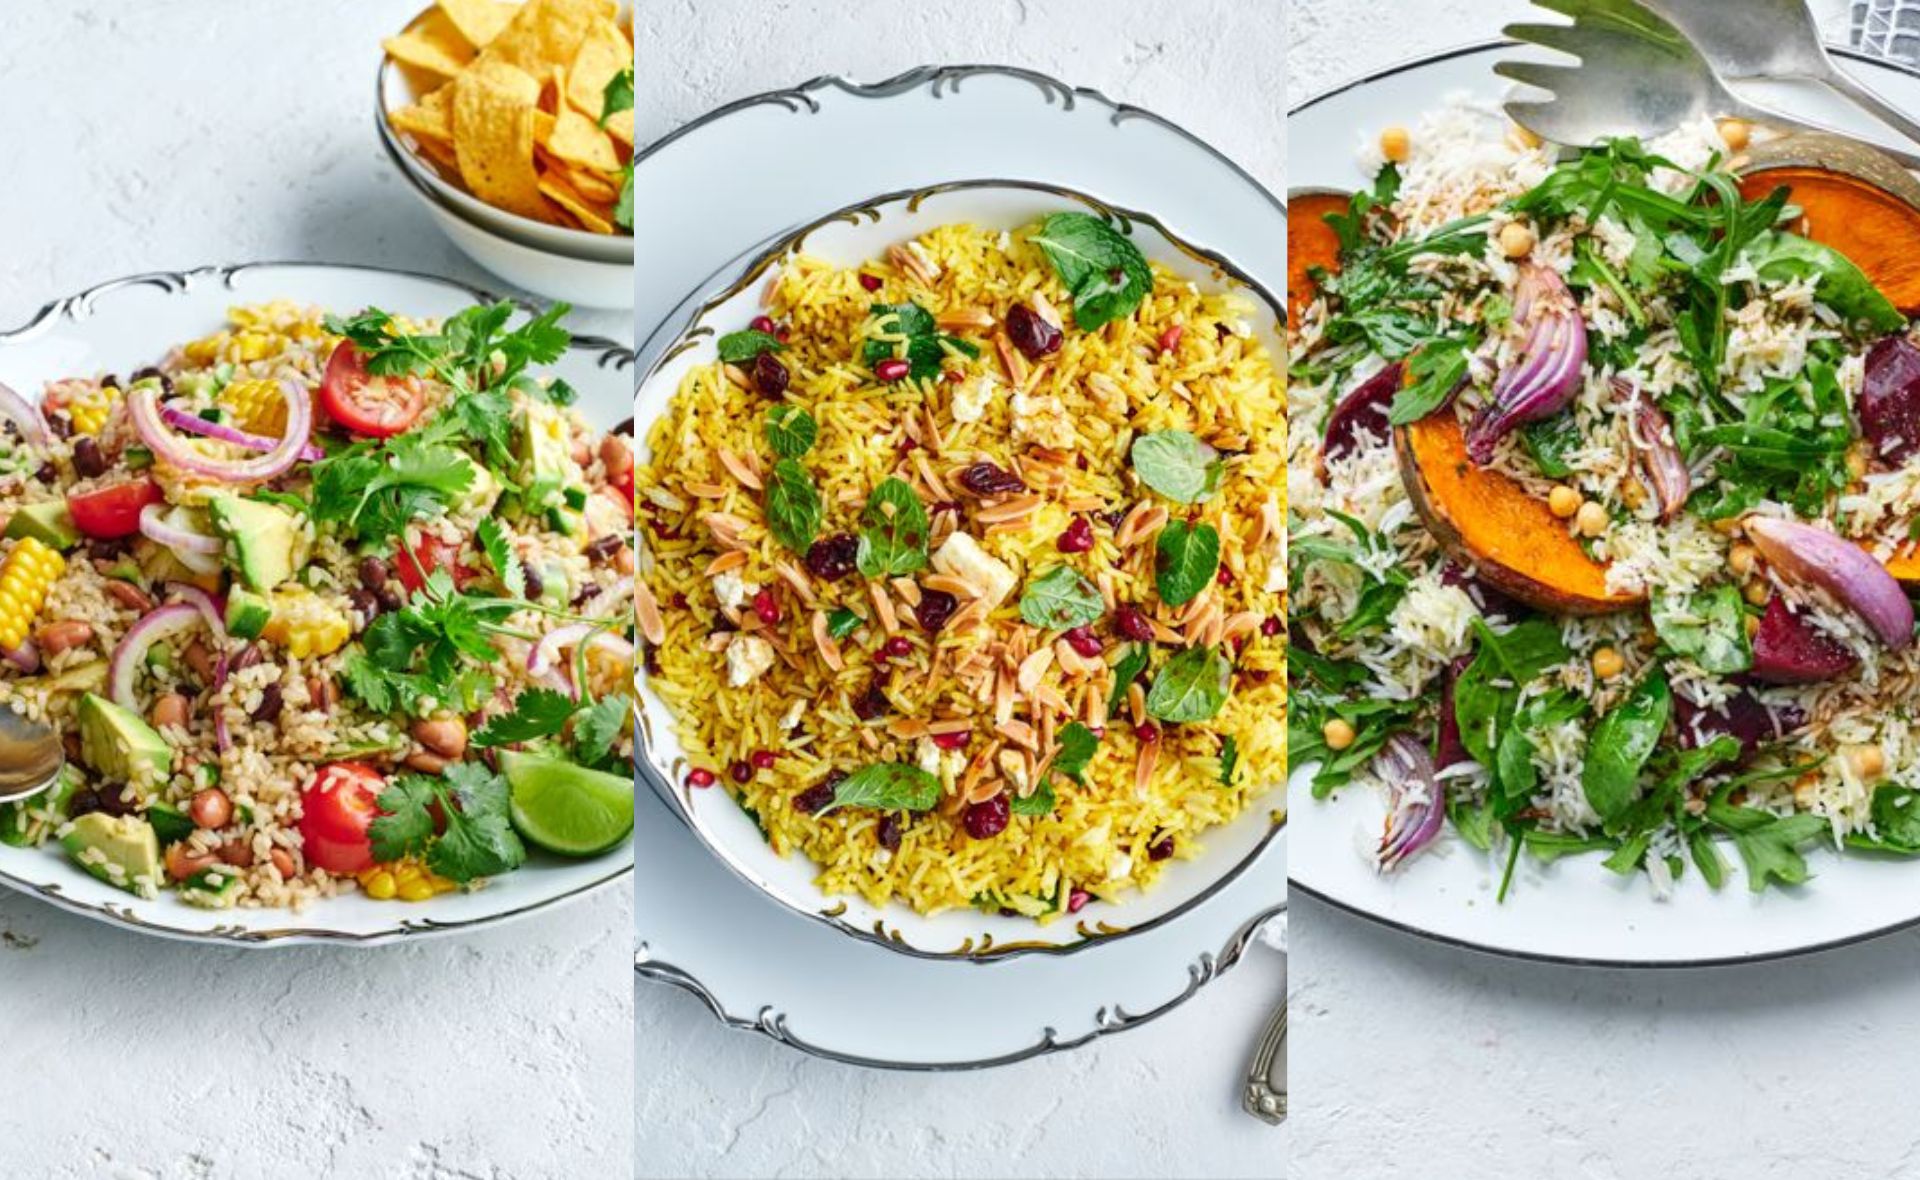 The most festive rice salad recipes for Christmas